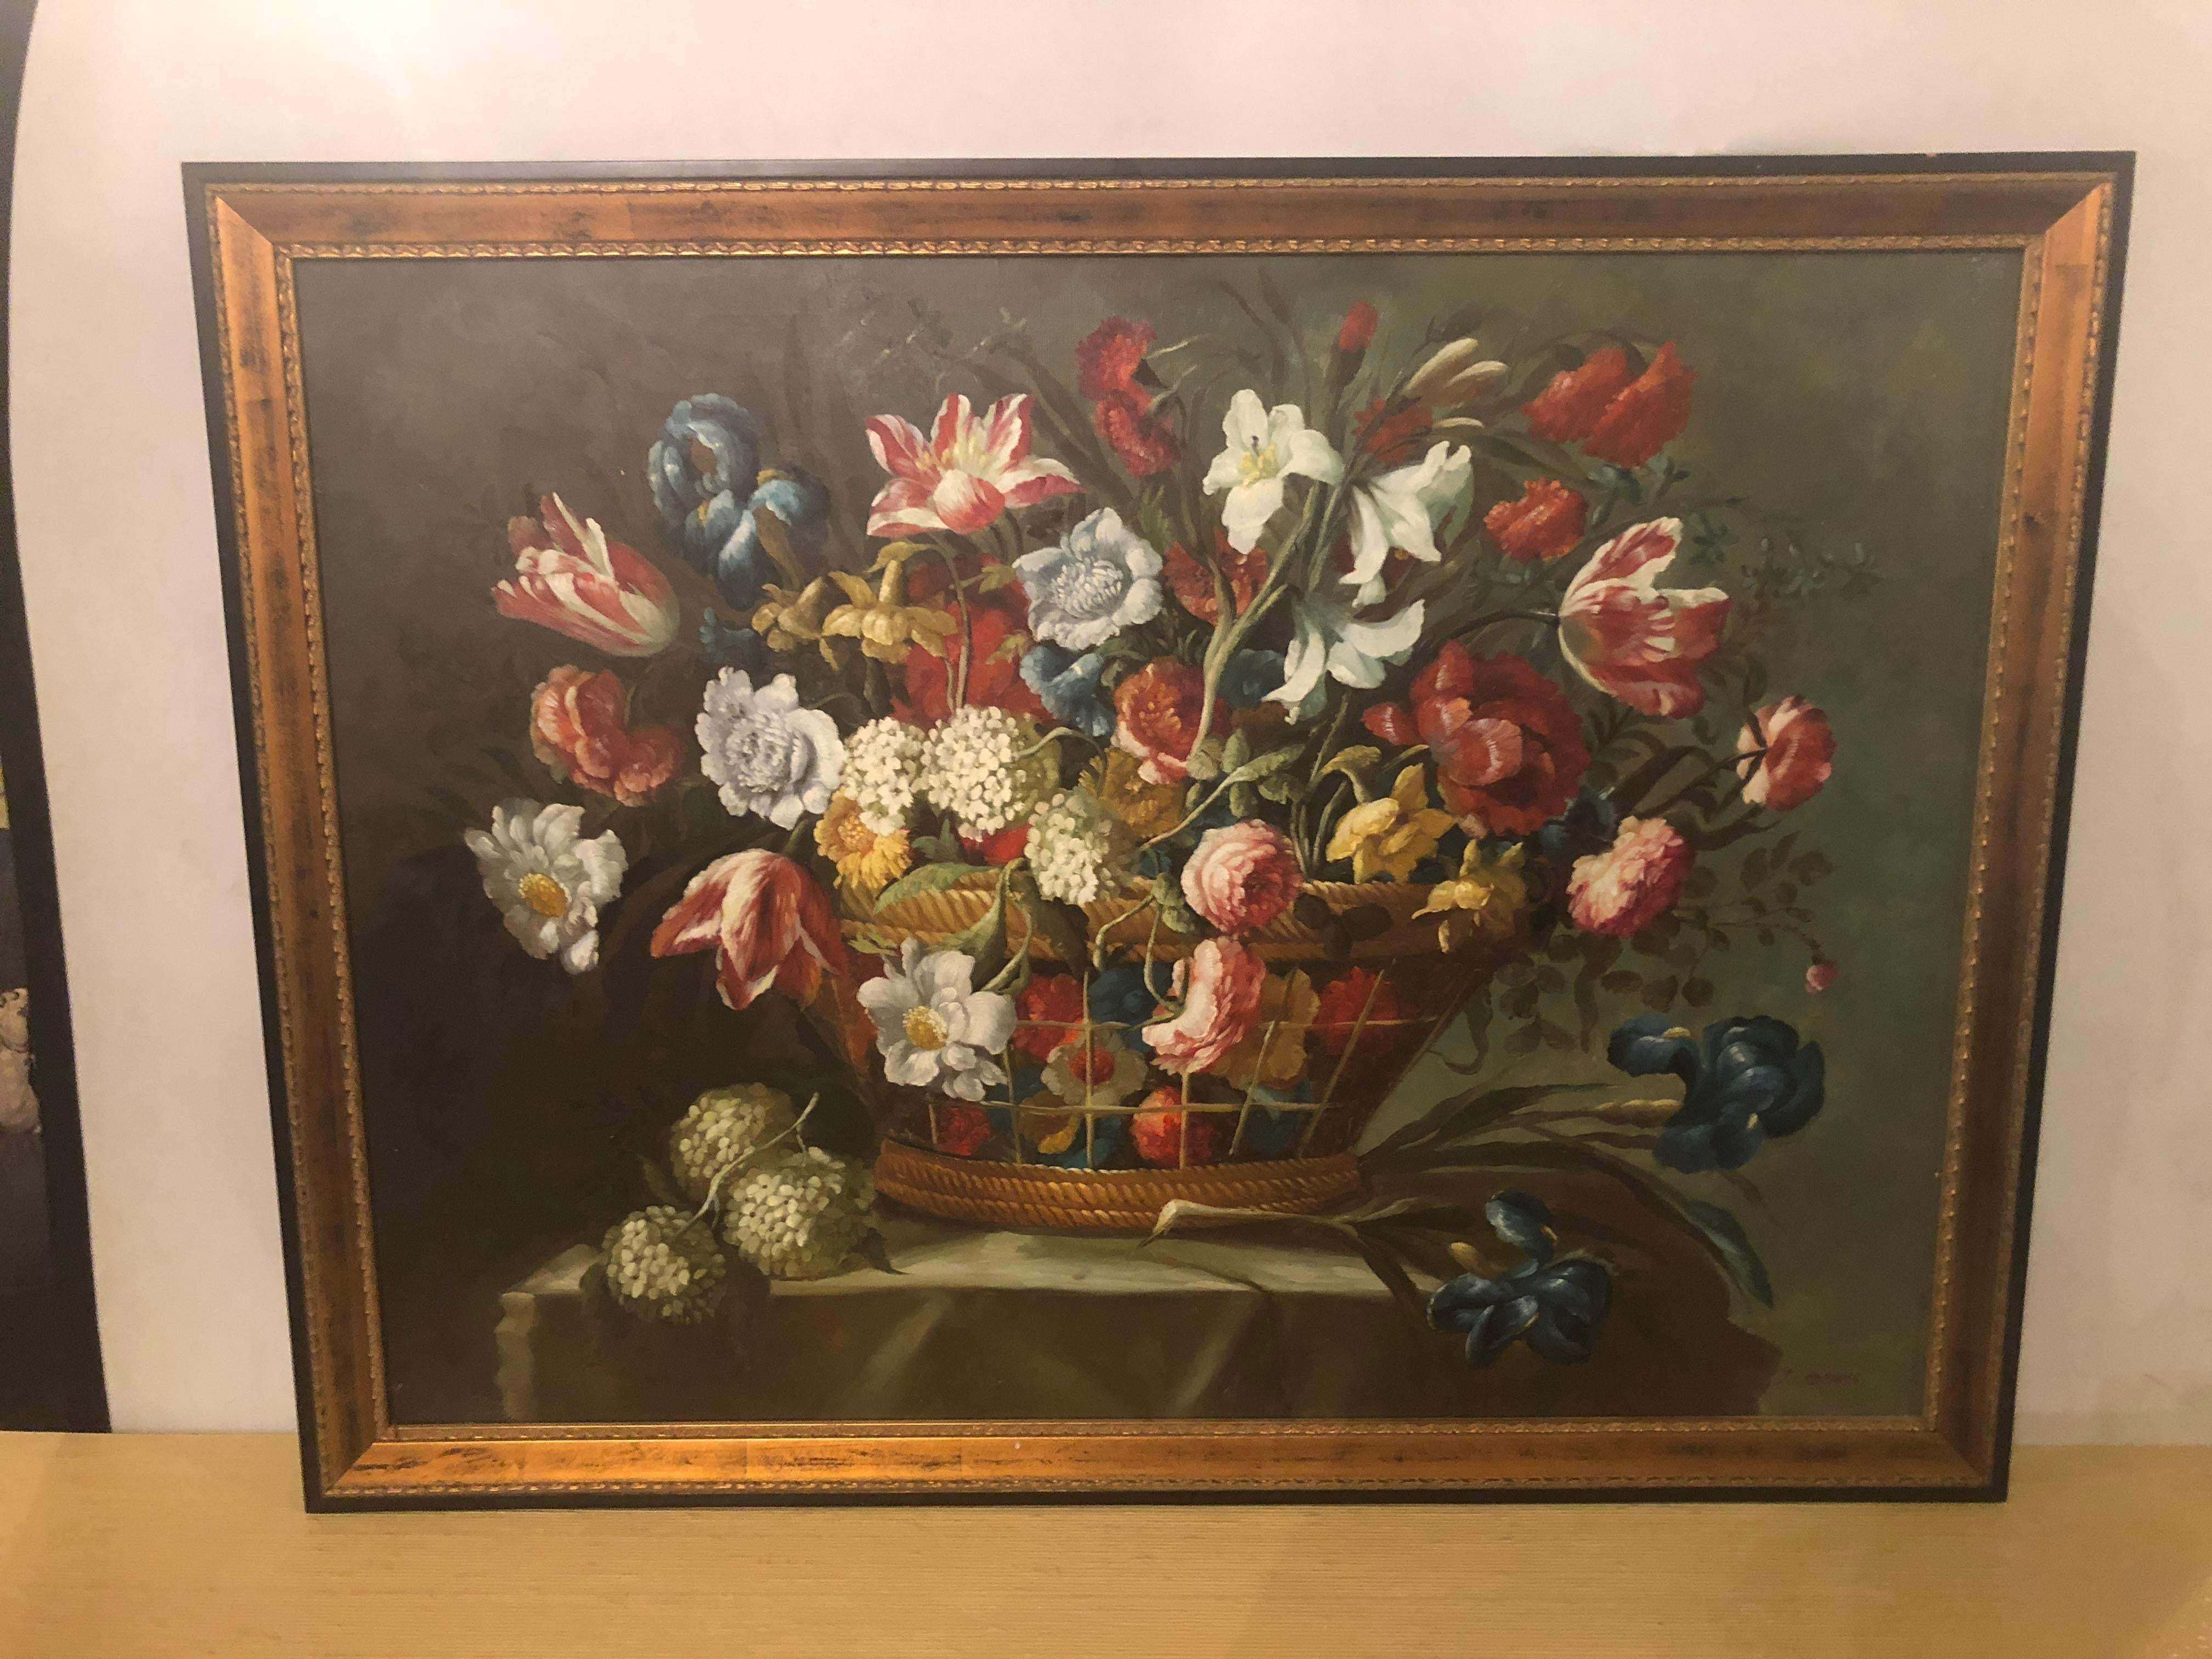 A beautiful large still life flowers bouquet oil on canvas painting in the style of Michele Antonio Rapos  (Turin 1733-1819) The piece of art features a dark deep green background and earthy toned colors. The frame is made of wood and painted in a